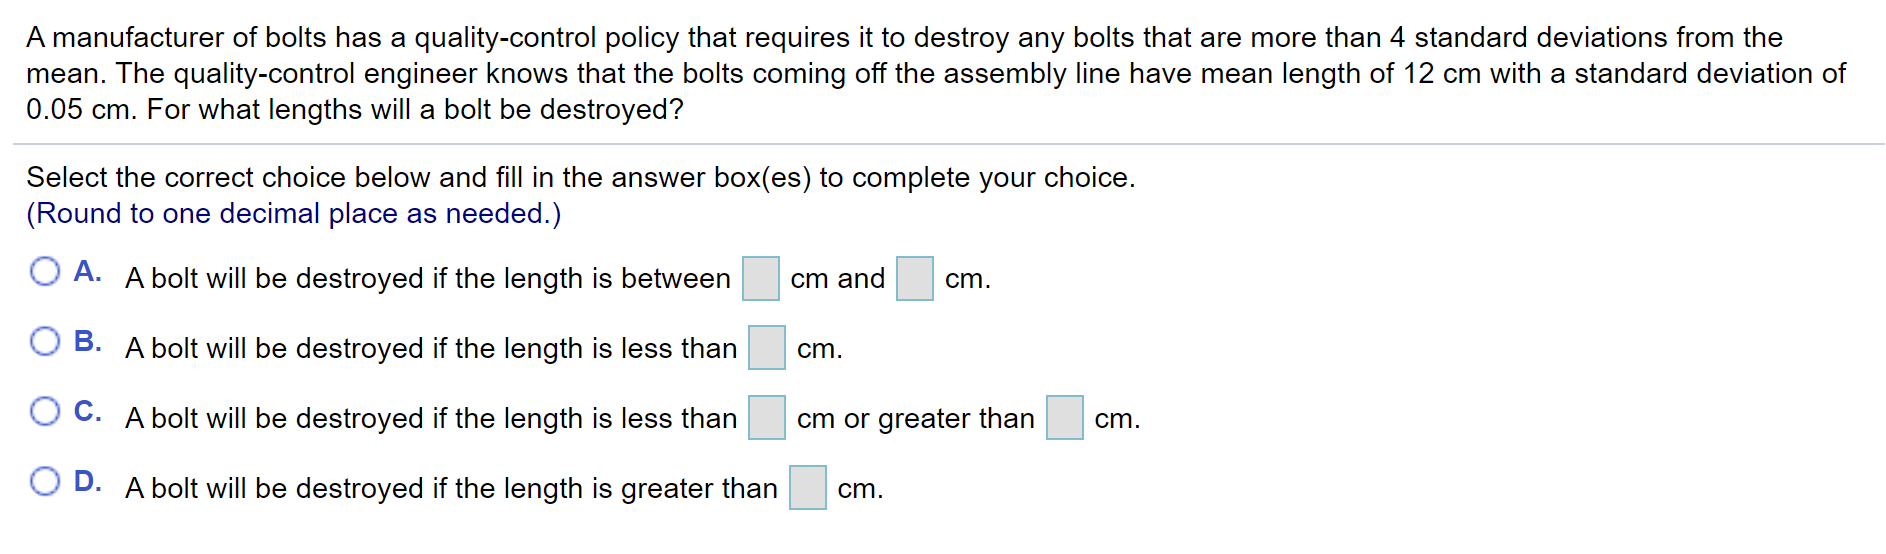 A manufacturer of bolts has a quality-control policy that requires it to destroy any bolts that are more than 4 standard deviations from the
mean. The quality-control engineer knows that the bolts coming off the assembly line have mean length of 12 cm with a standard deviation of
0.05 cm. For what lengths will a bolt be destroyed?
Select the correct choice below and fill in the answer box(es) to complete your choice.
(Round to one decimal place as needed.)
O A. A bolt will be destroyed if the length is between
cm and
cm.
B. A bolt will be destroyed if the length is less than
cm.
O C. A bolt will be destroyed if the length is less than
cm or greater than
cm.
O D. A bolt will be destroyed if the length is greater than
cm.
